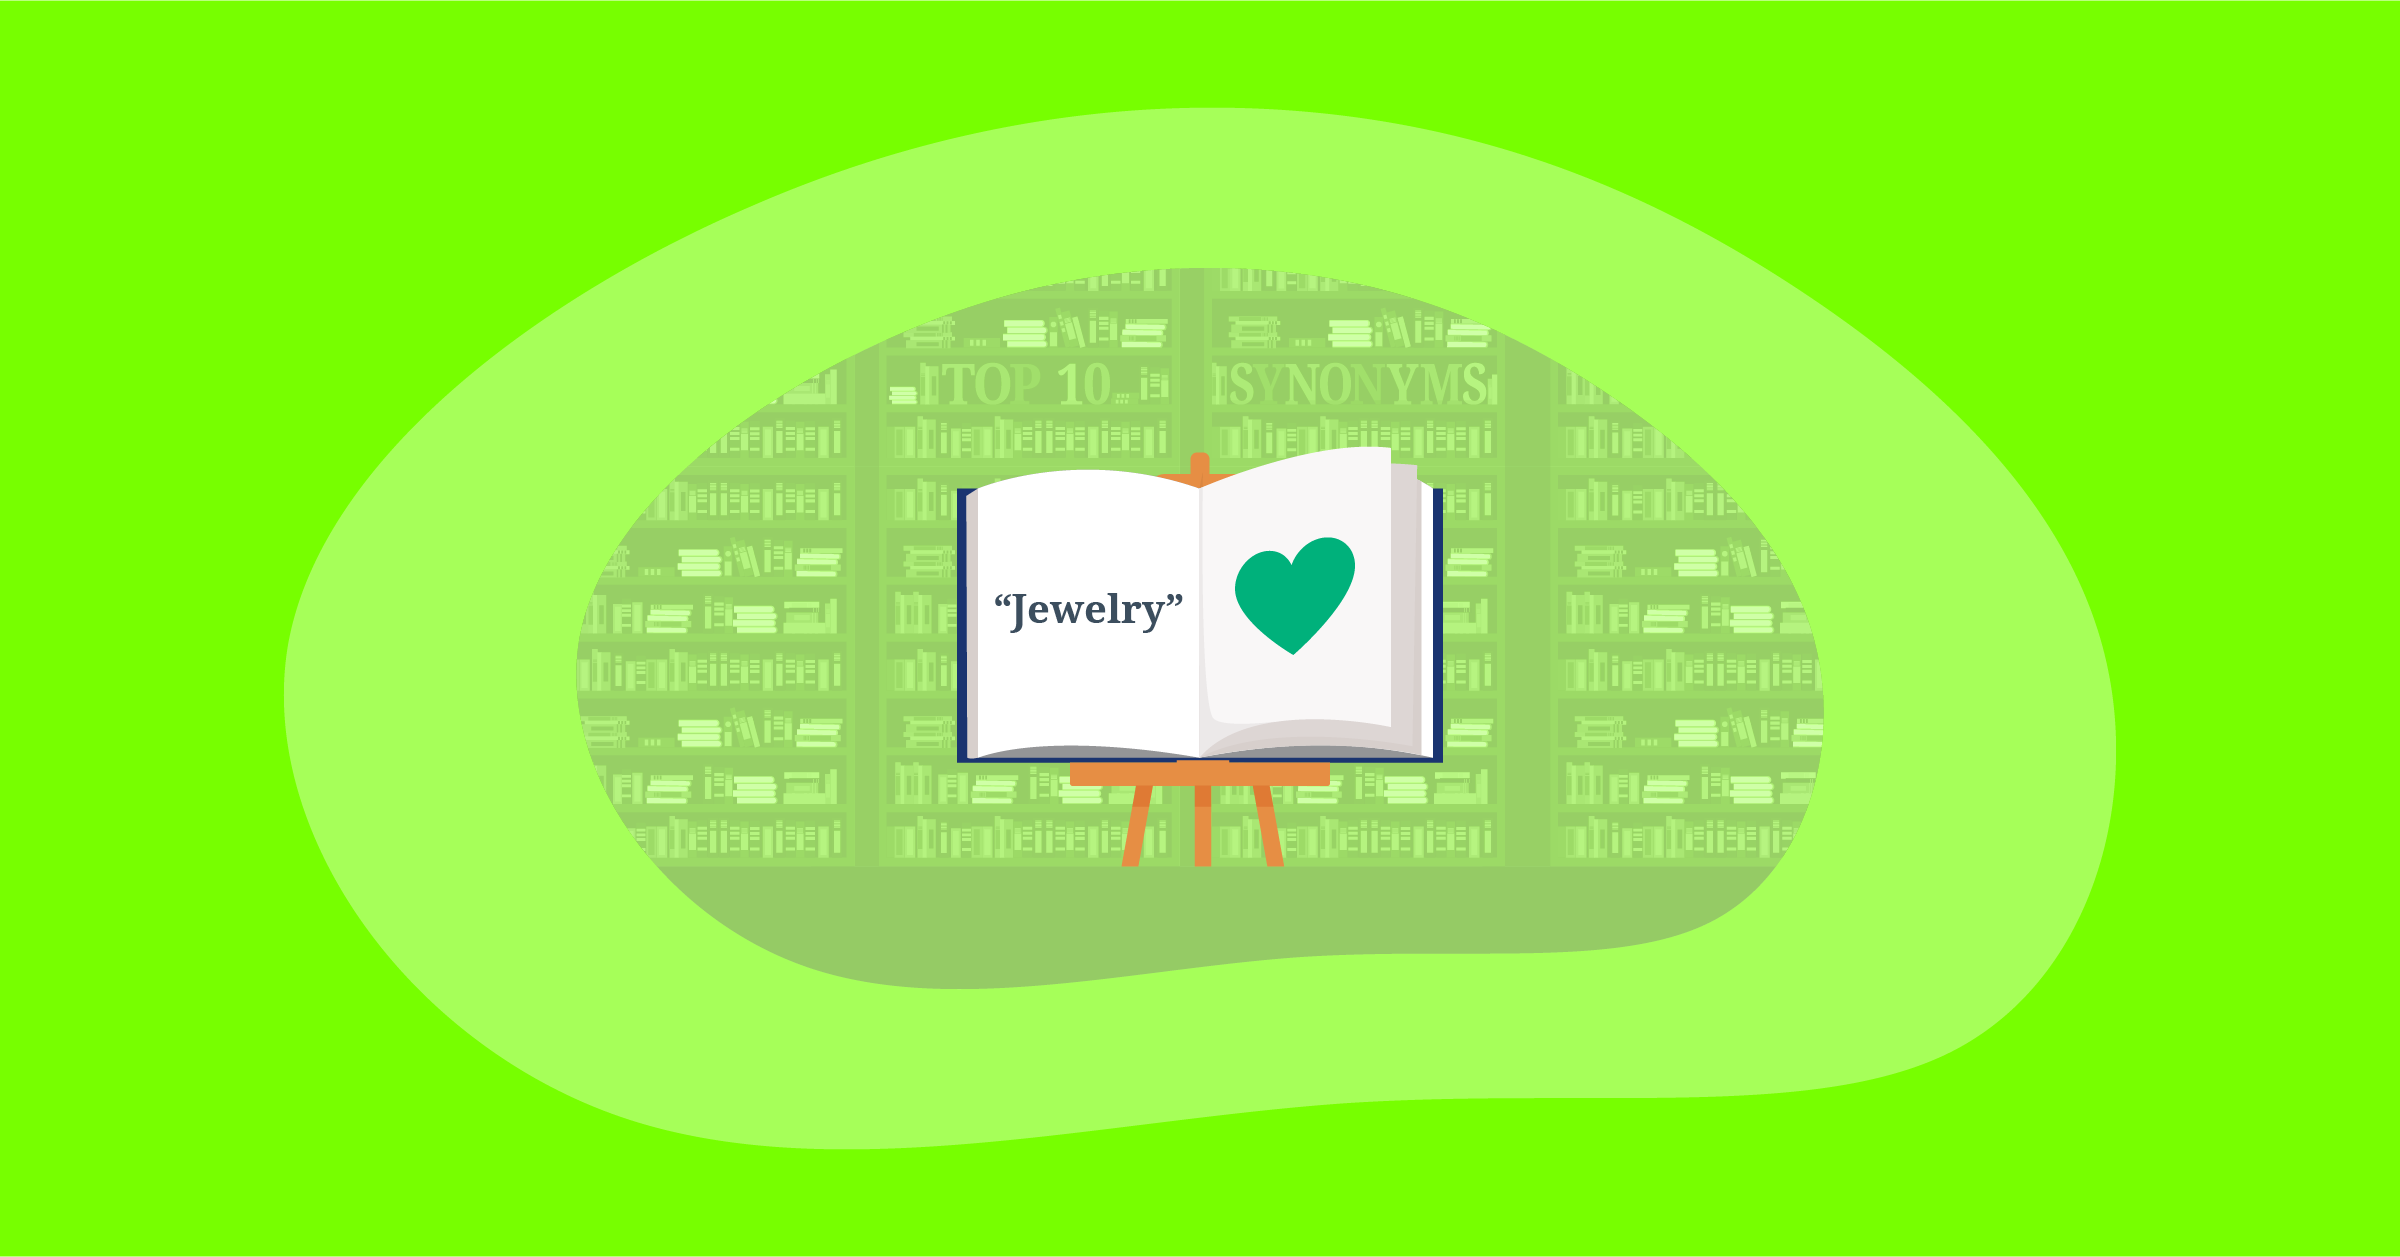 Illustration of the top 10 positive impactful synonyms for "Jewelry"